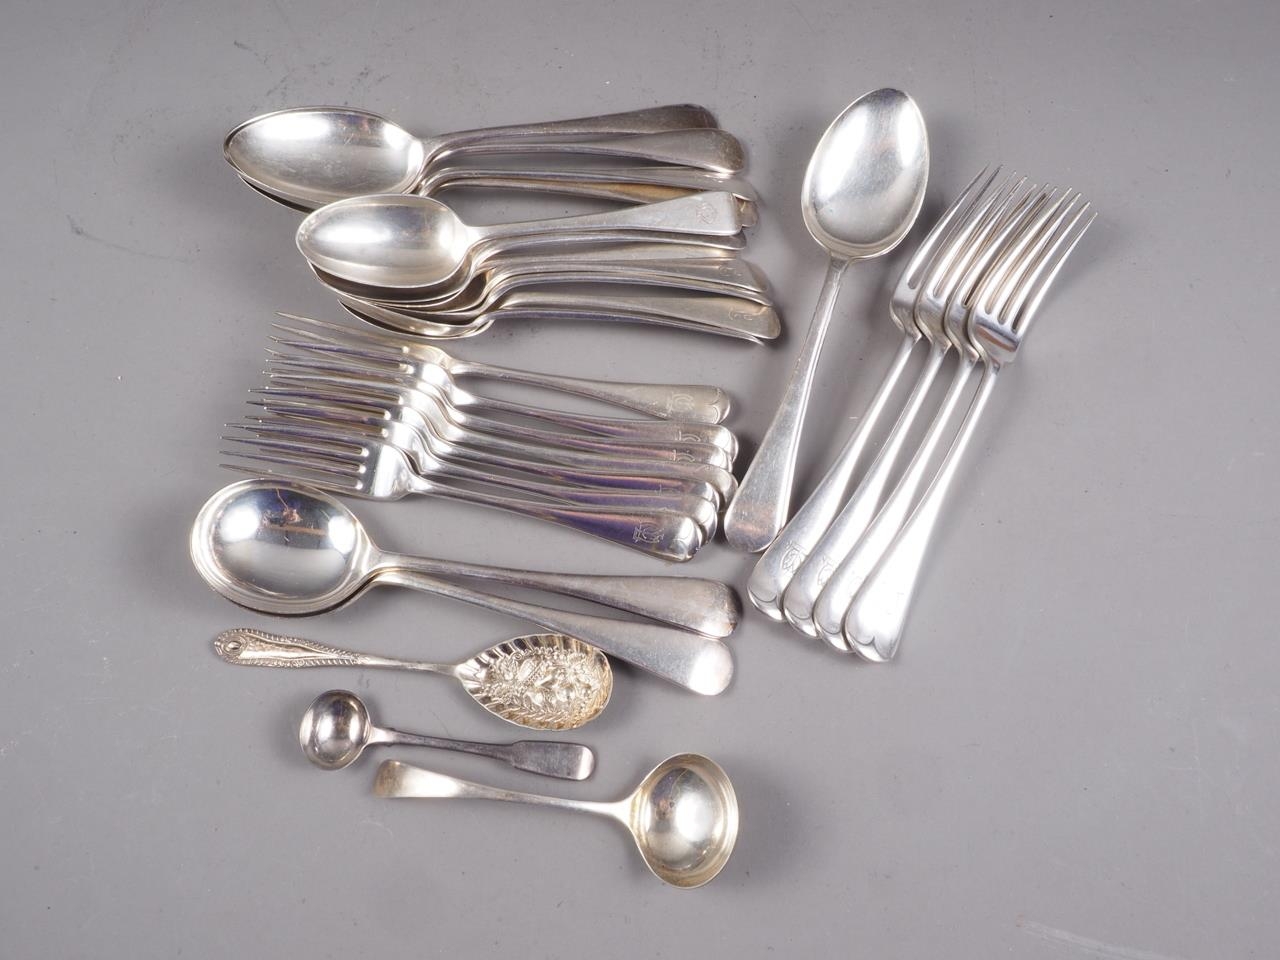 Two silver tablespoons, monogrammed "L", four matching dessert spoons, three other silver dessert